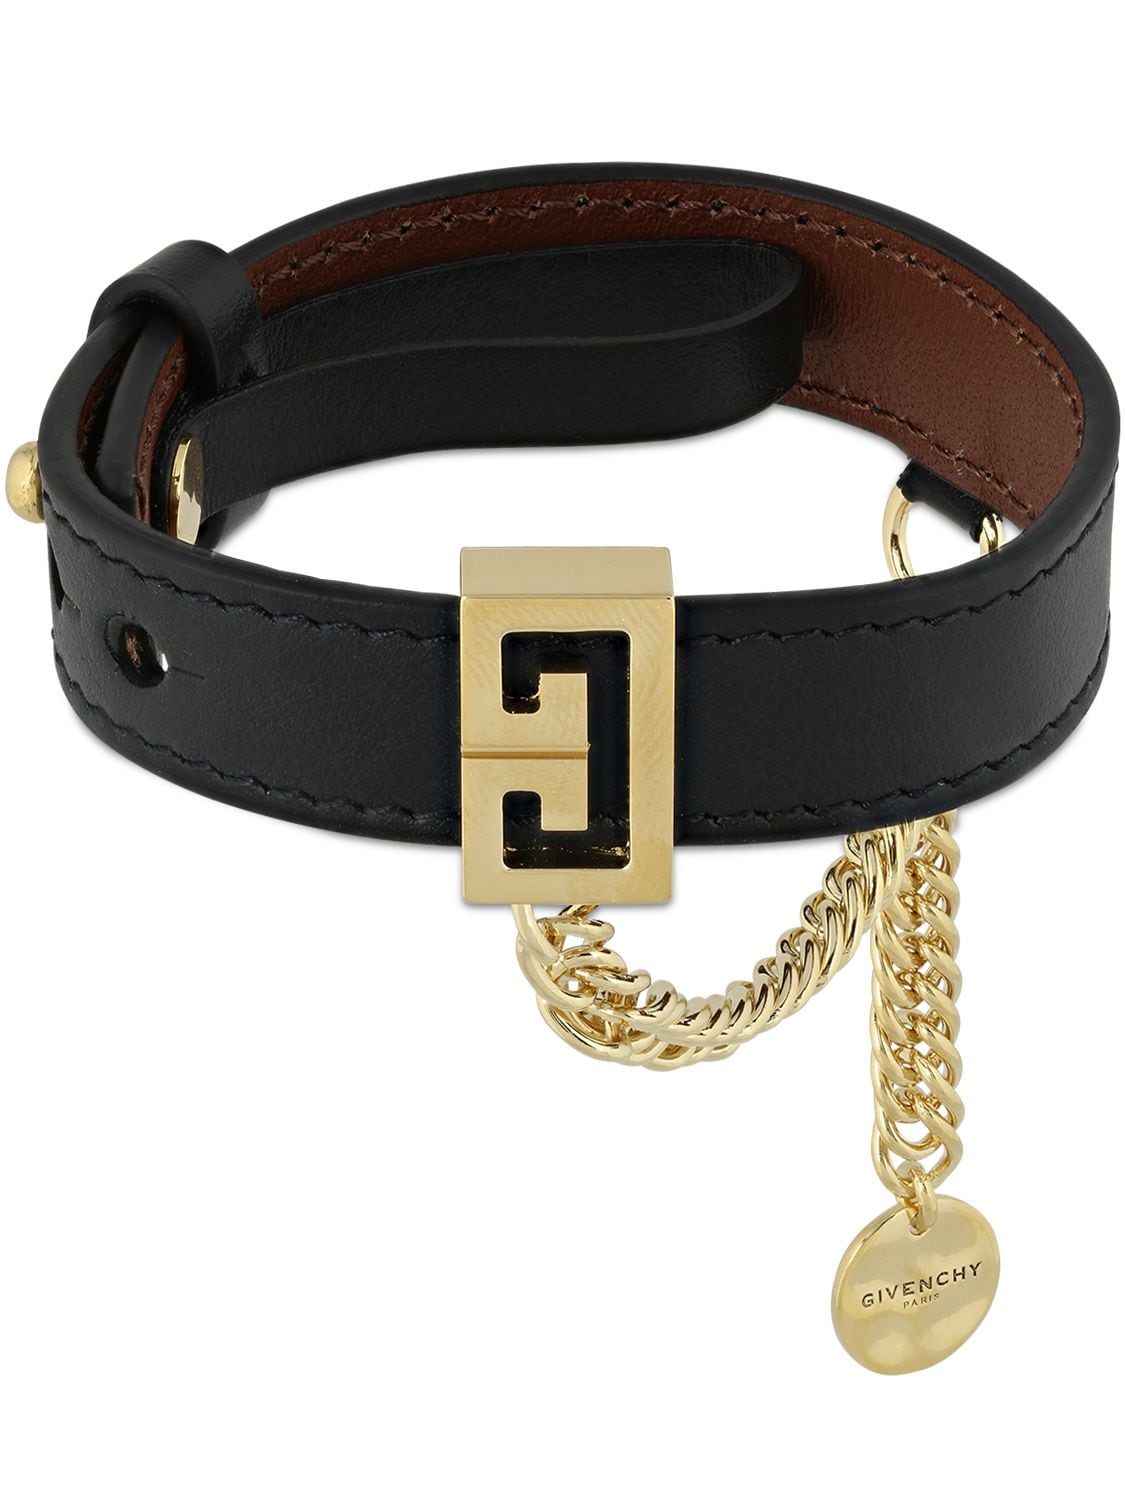 Givenchy Leather Bracelet W/ Chain In Black